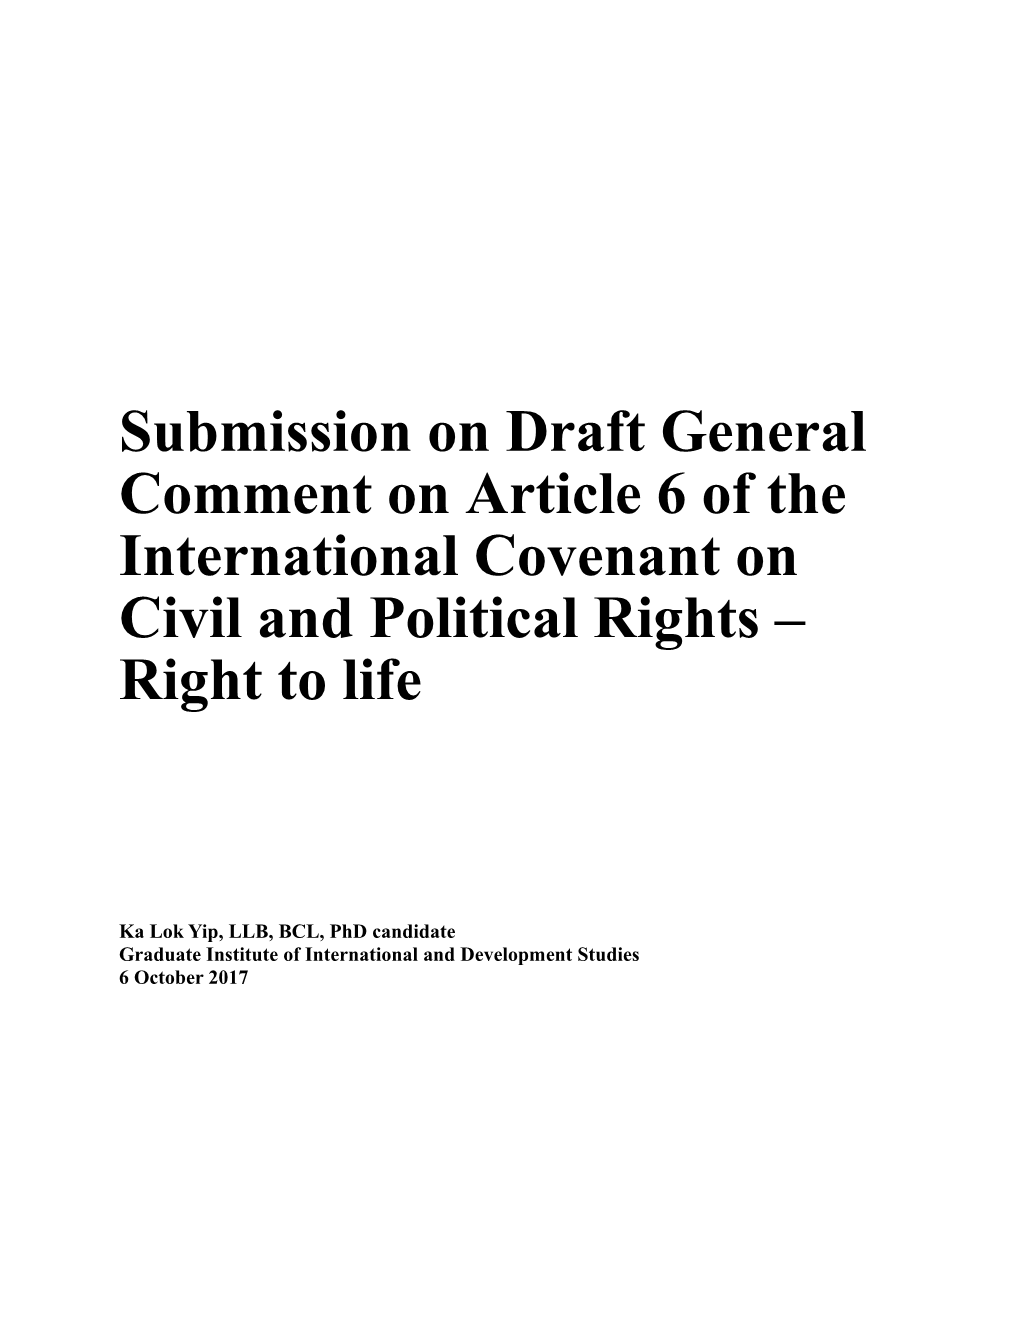 Submission on Draft General Comment on Article 6 of the International Covenant on Civil